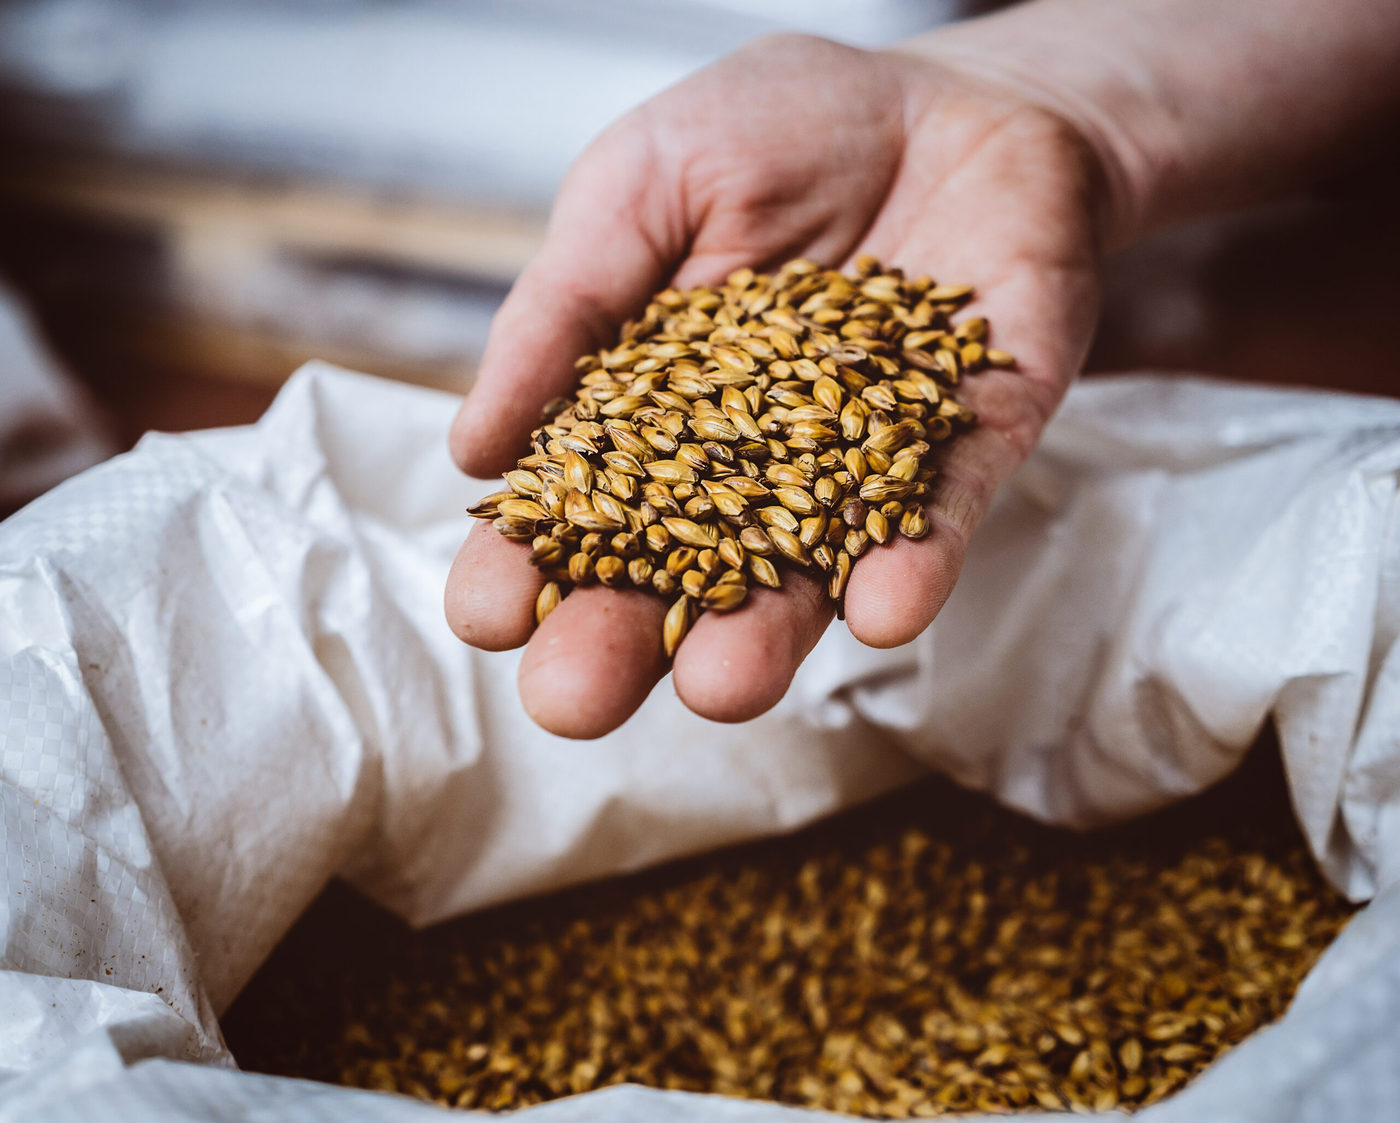 Person holding handfull of grains over a large bag of grains